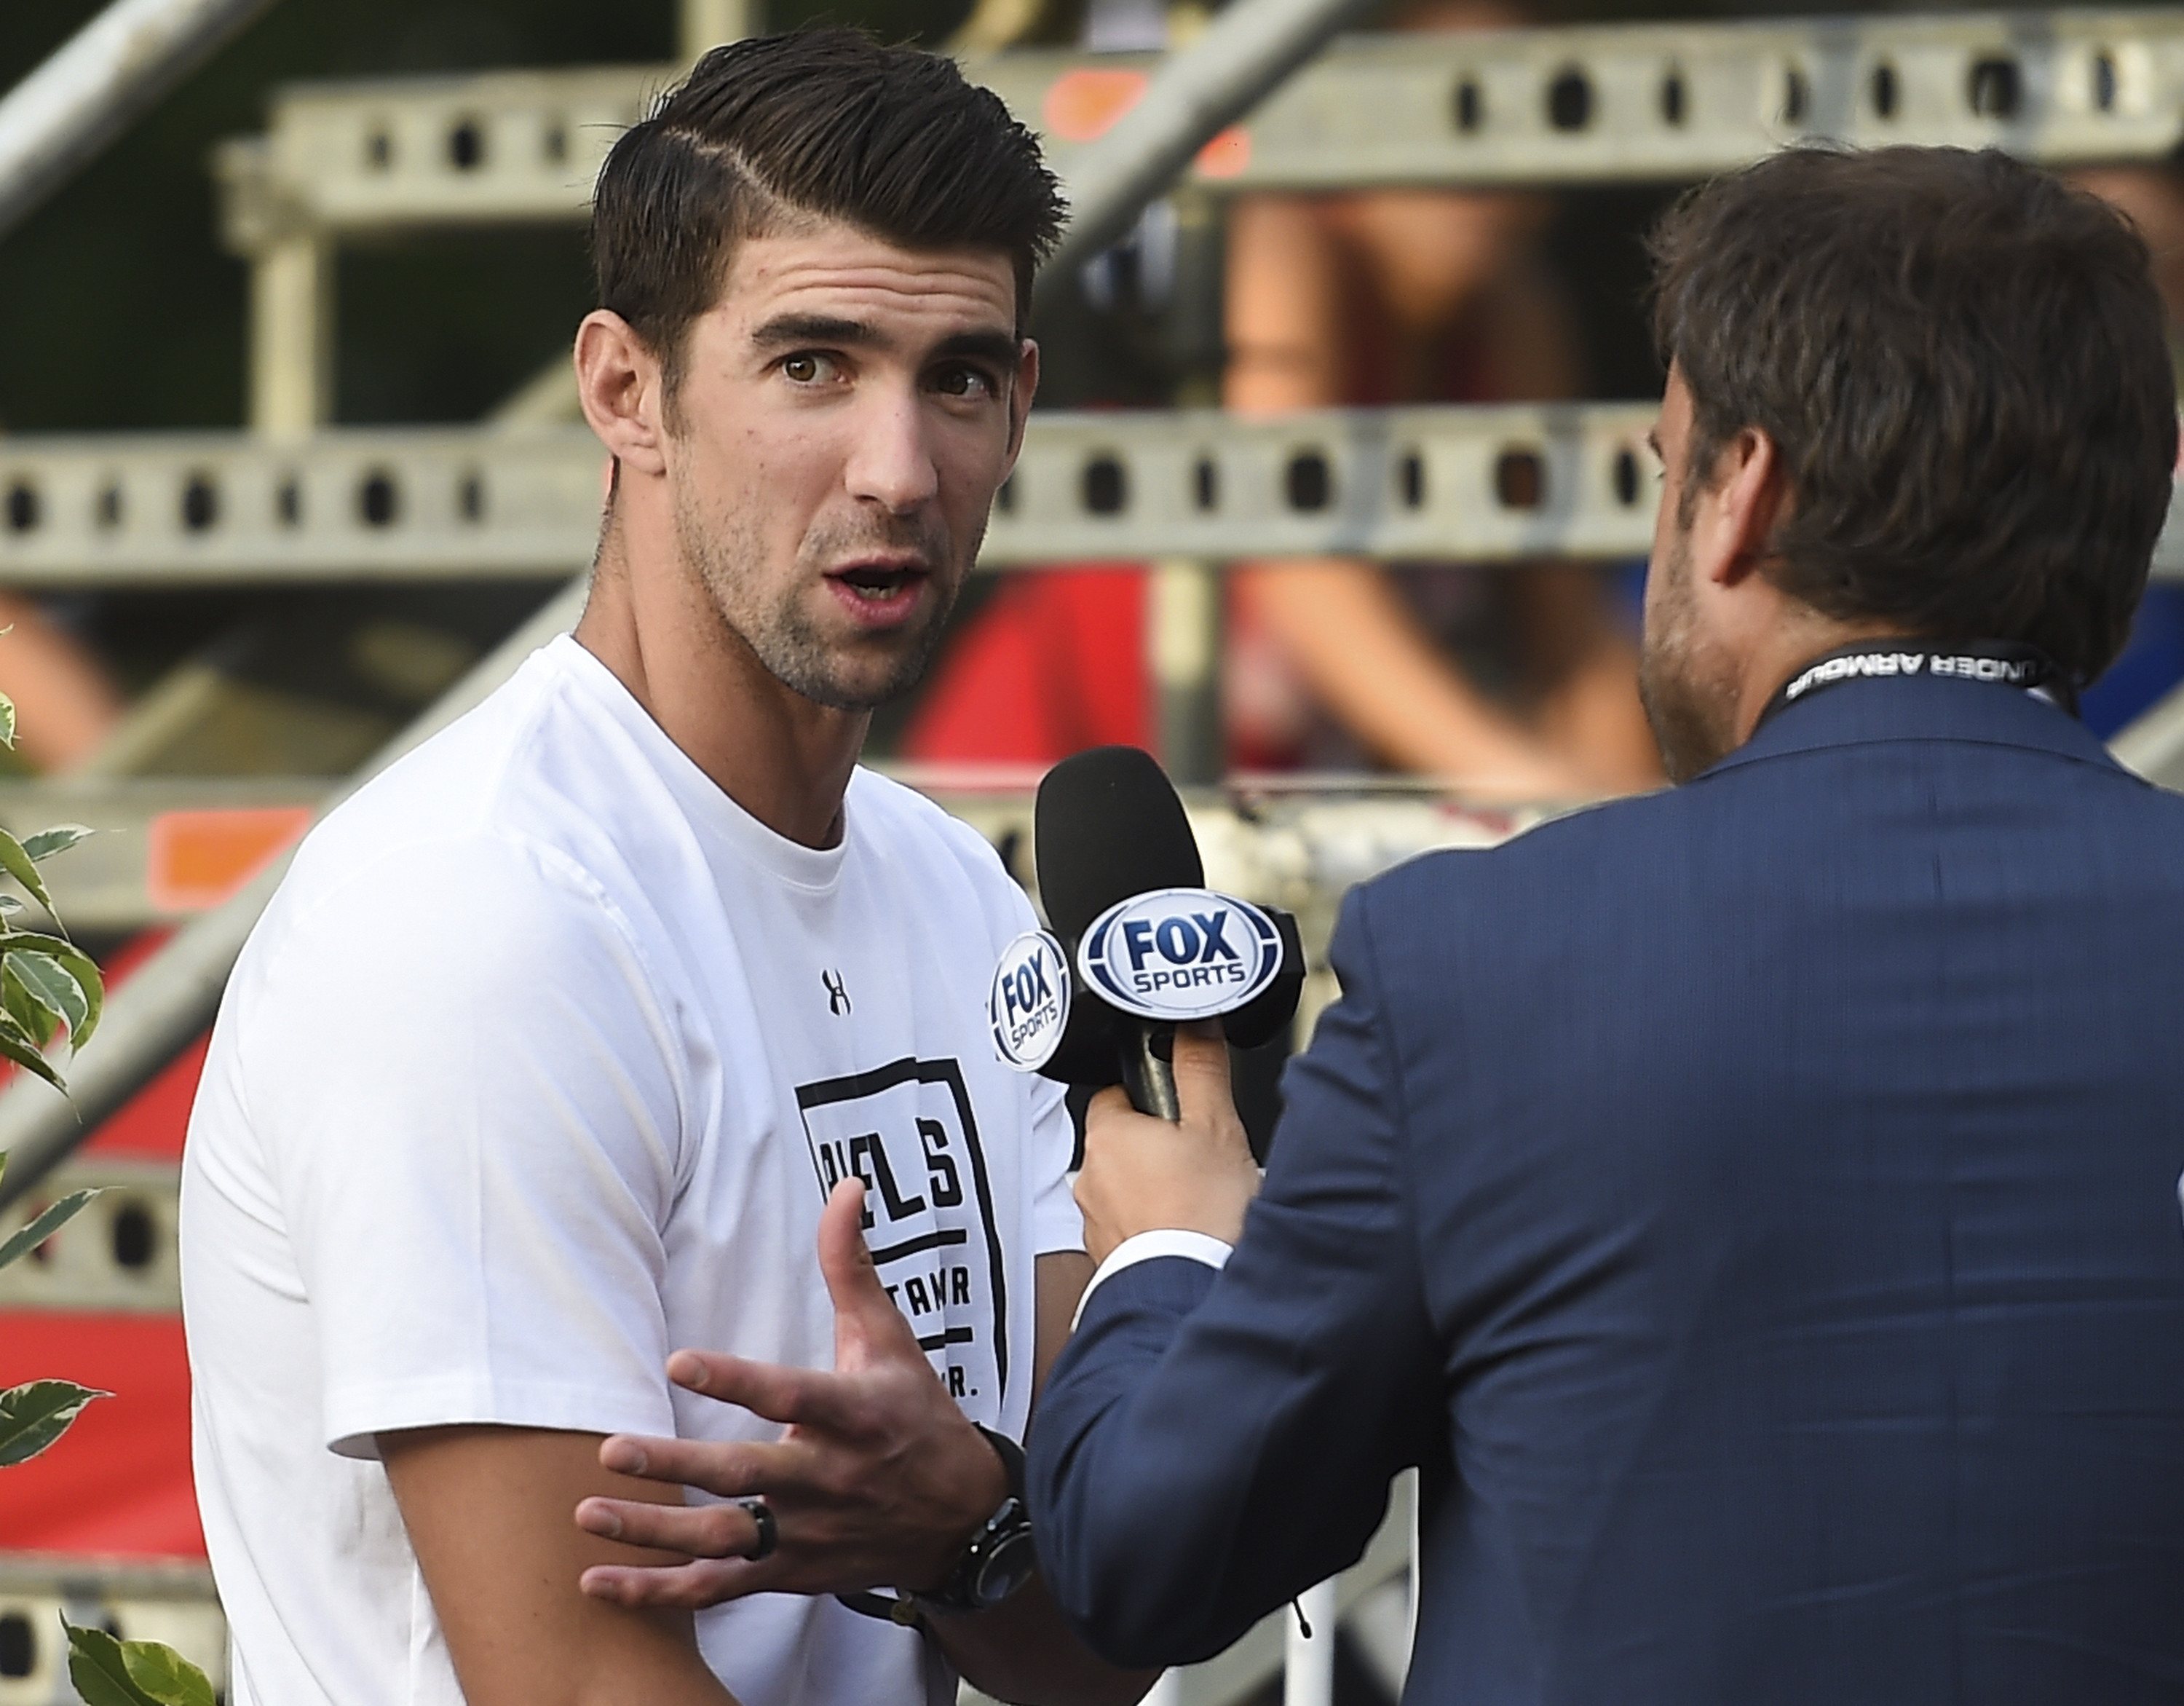 Michael Phelps talks to the media during his visit to Argentina at El Rosedal Park on December 07, 2017 in Buenos Aires, Argentina. (Marcelo Endelli/Getty Images)